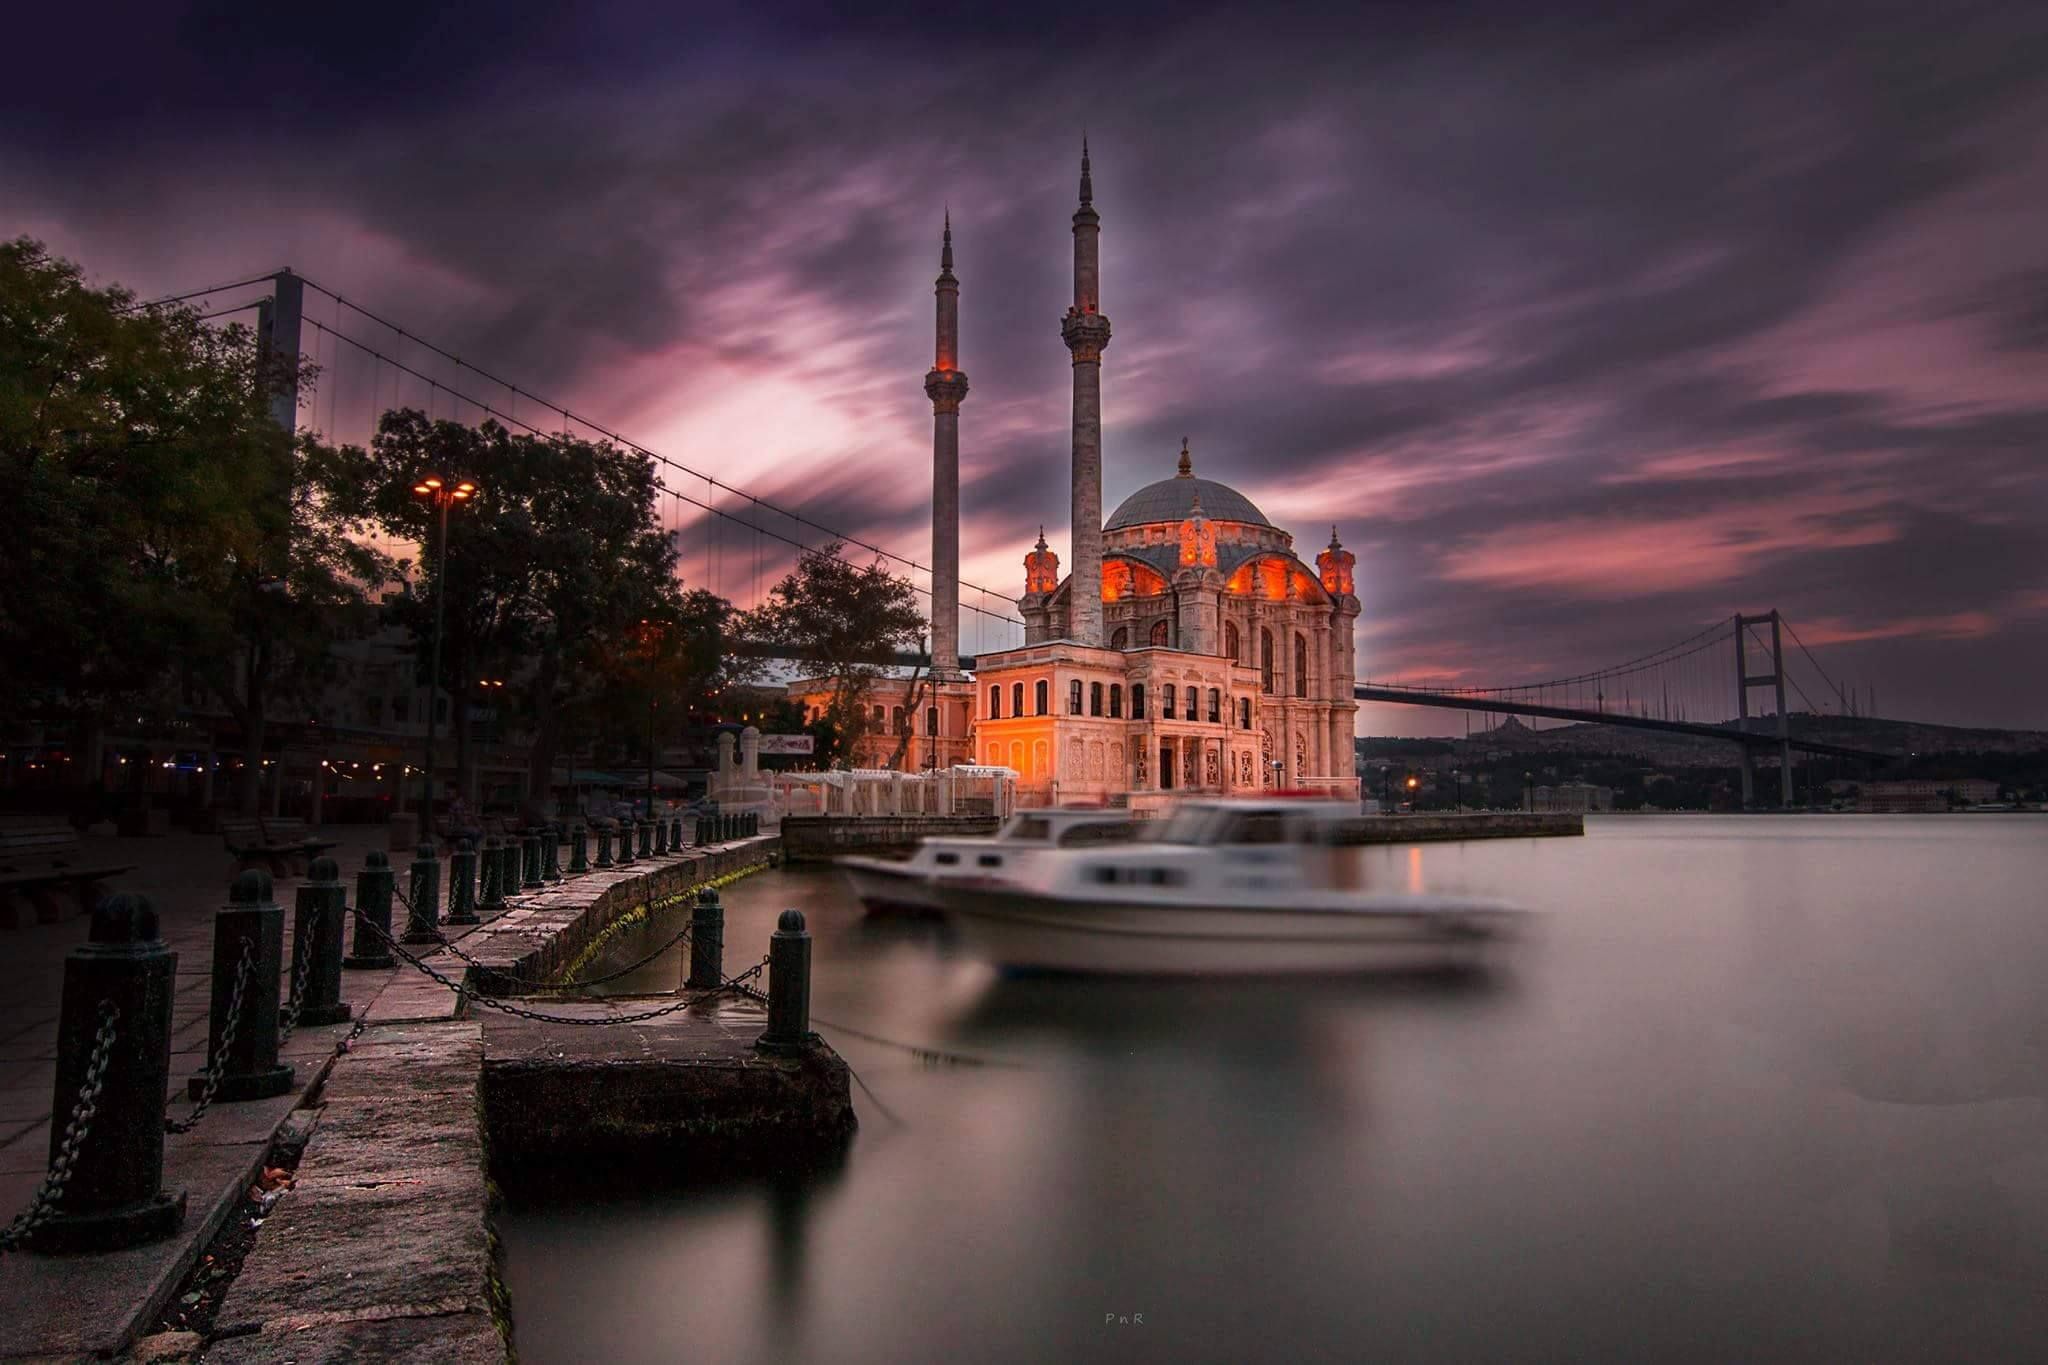 The Ortakoy Mosque in istanbul